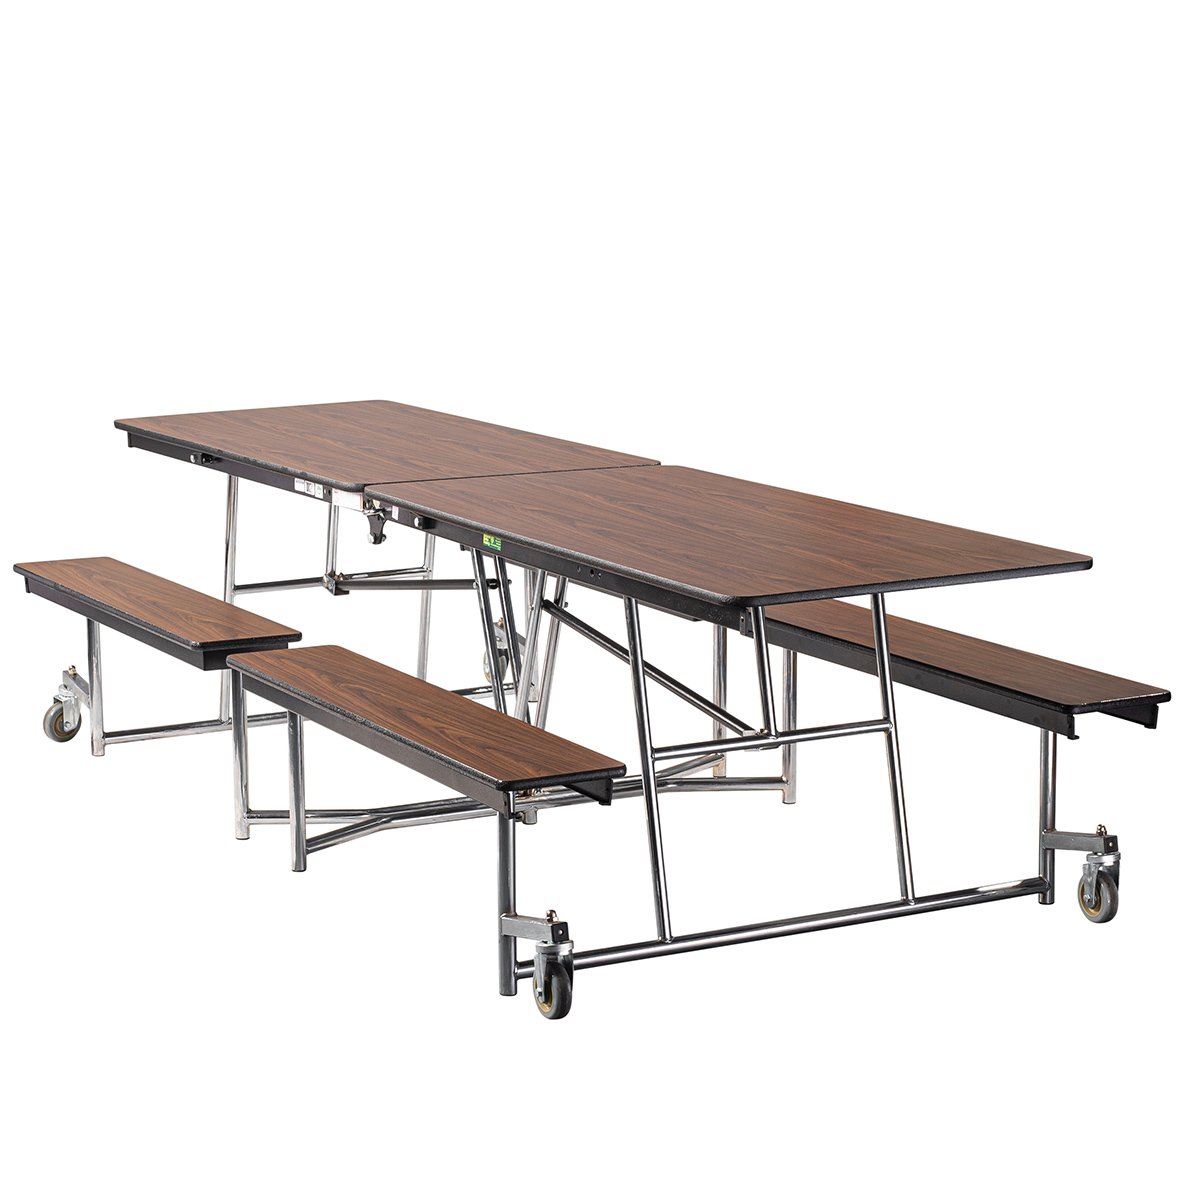 NPS 10′ Mobile Bench Cafeteria Table w Particleboard Core, T-Mold Edge, Chrome Frame